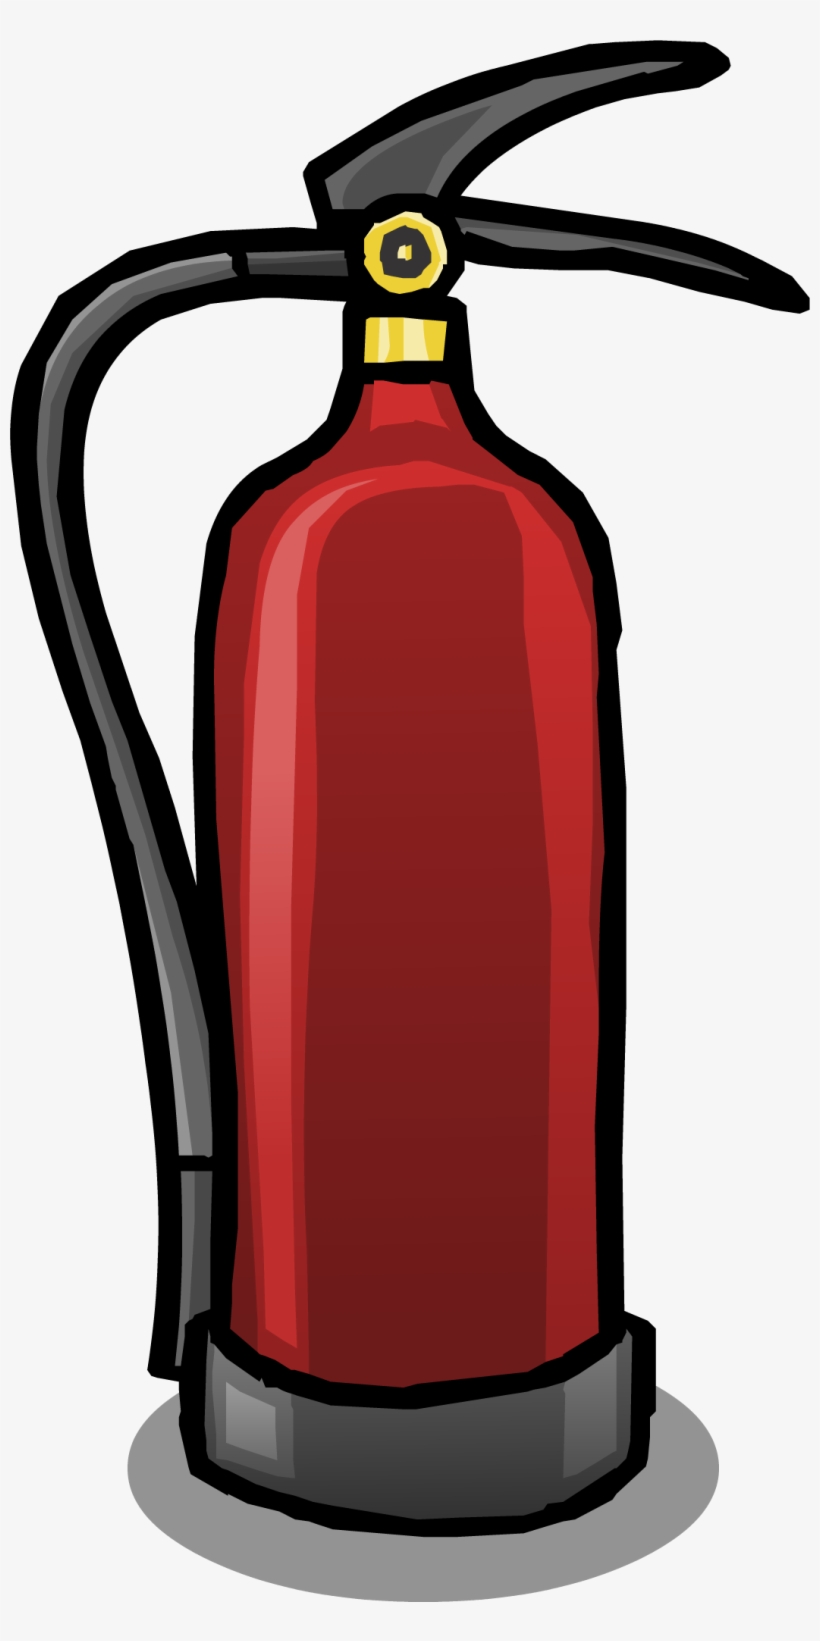 Fire Extinguisher Sprite 001 - Fire Extinguisher Png Animated, transparent png #1728379